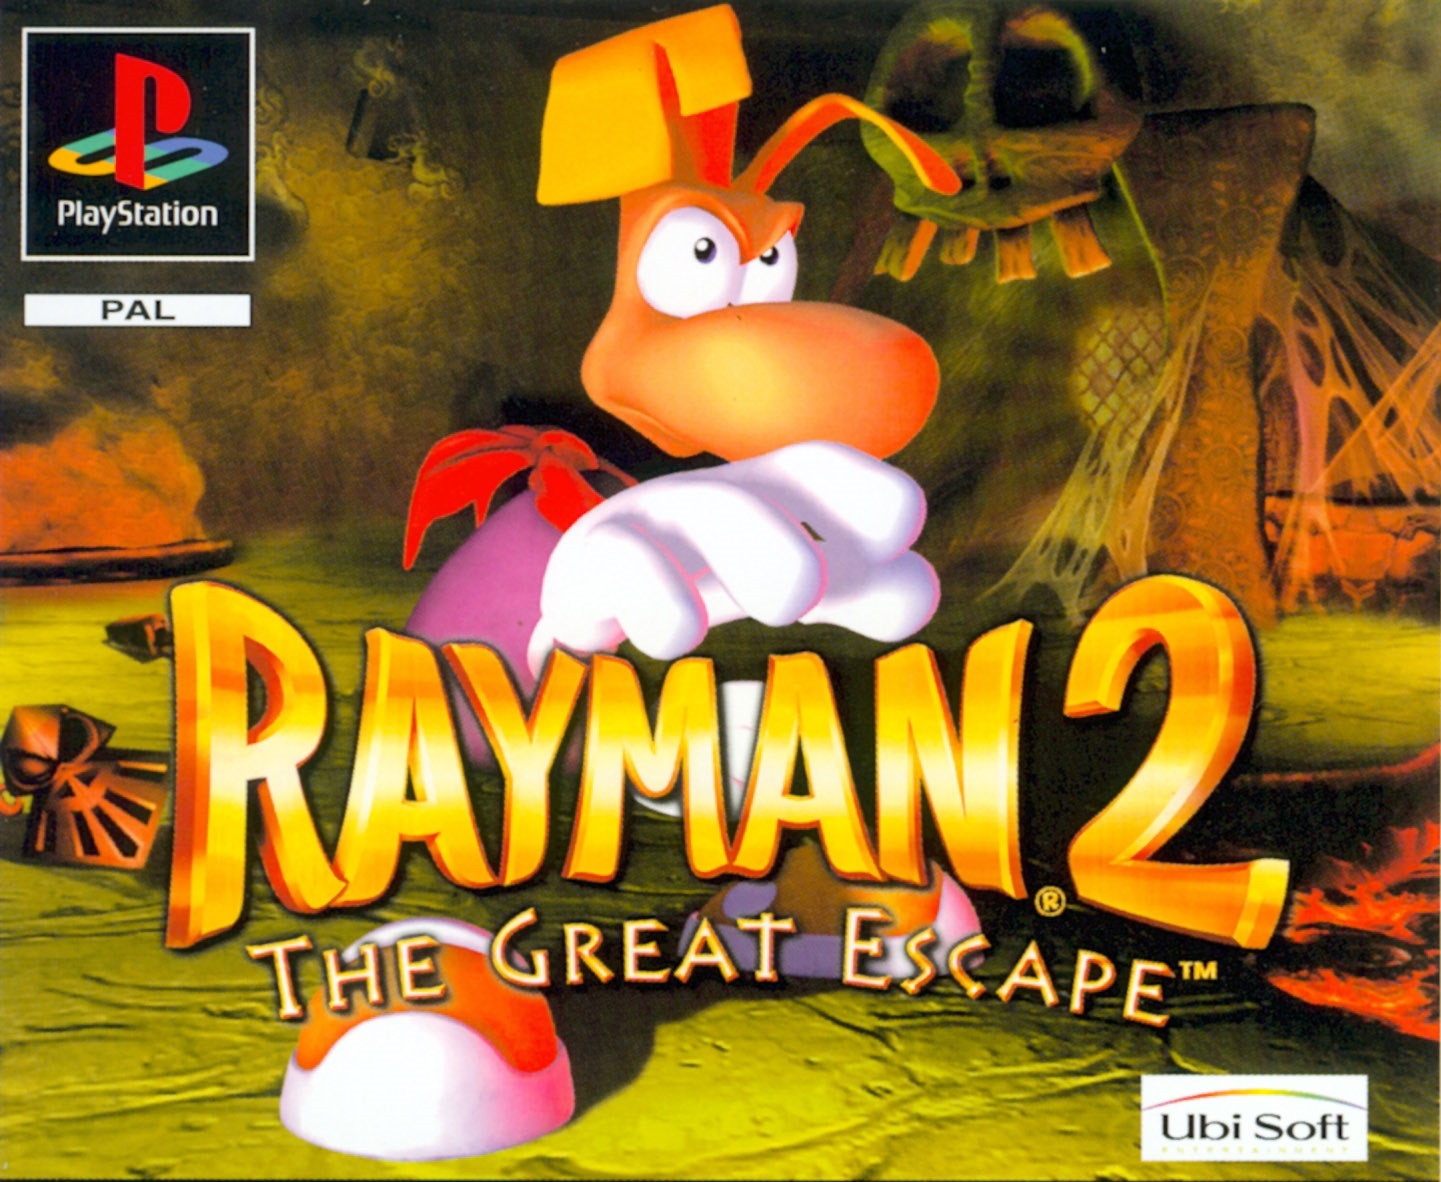 Rayman 2: The Great Escape Kopen | Playstation 1 Games